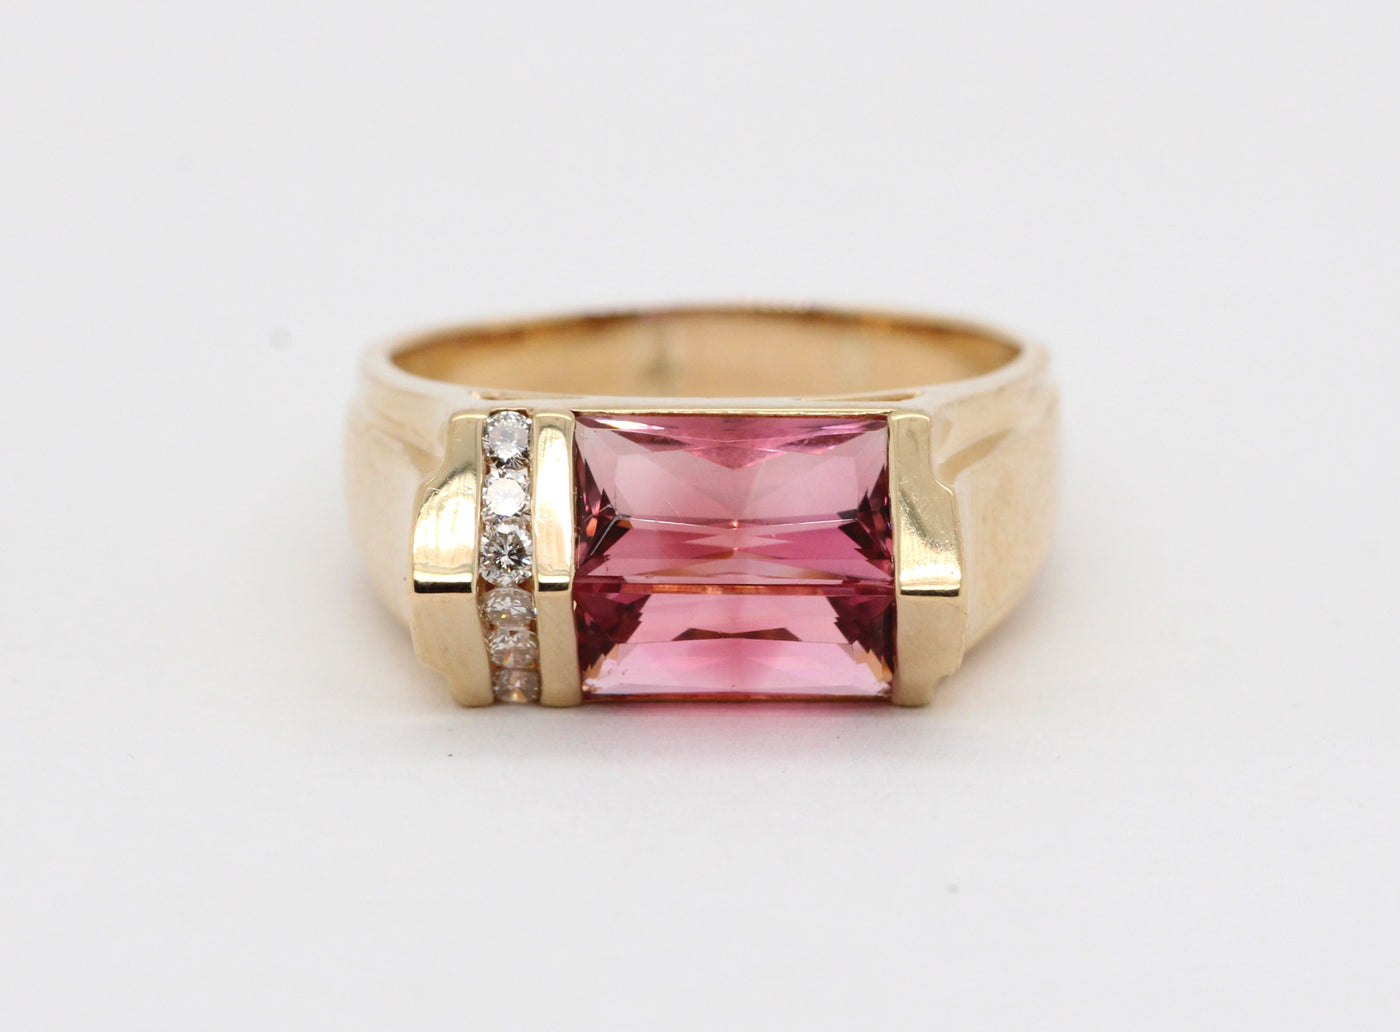 Estate 14ky 4.75 ct tourmaline and diamond ring, .12 cttw h-si2